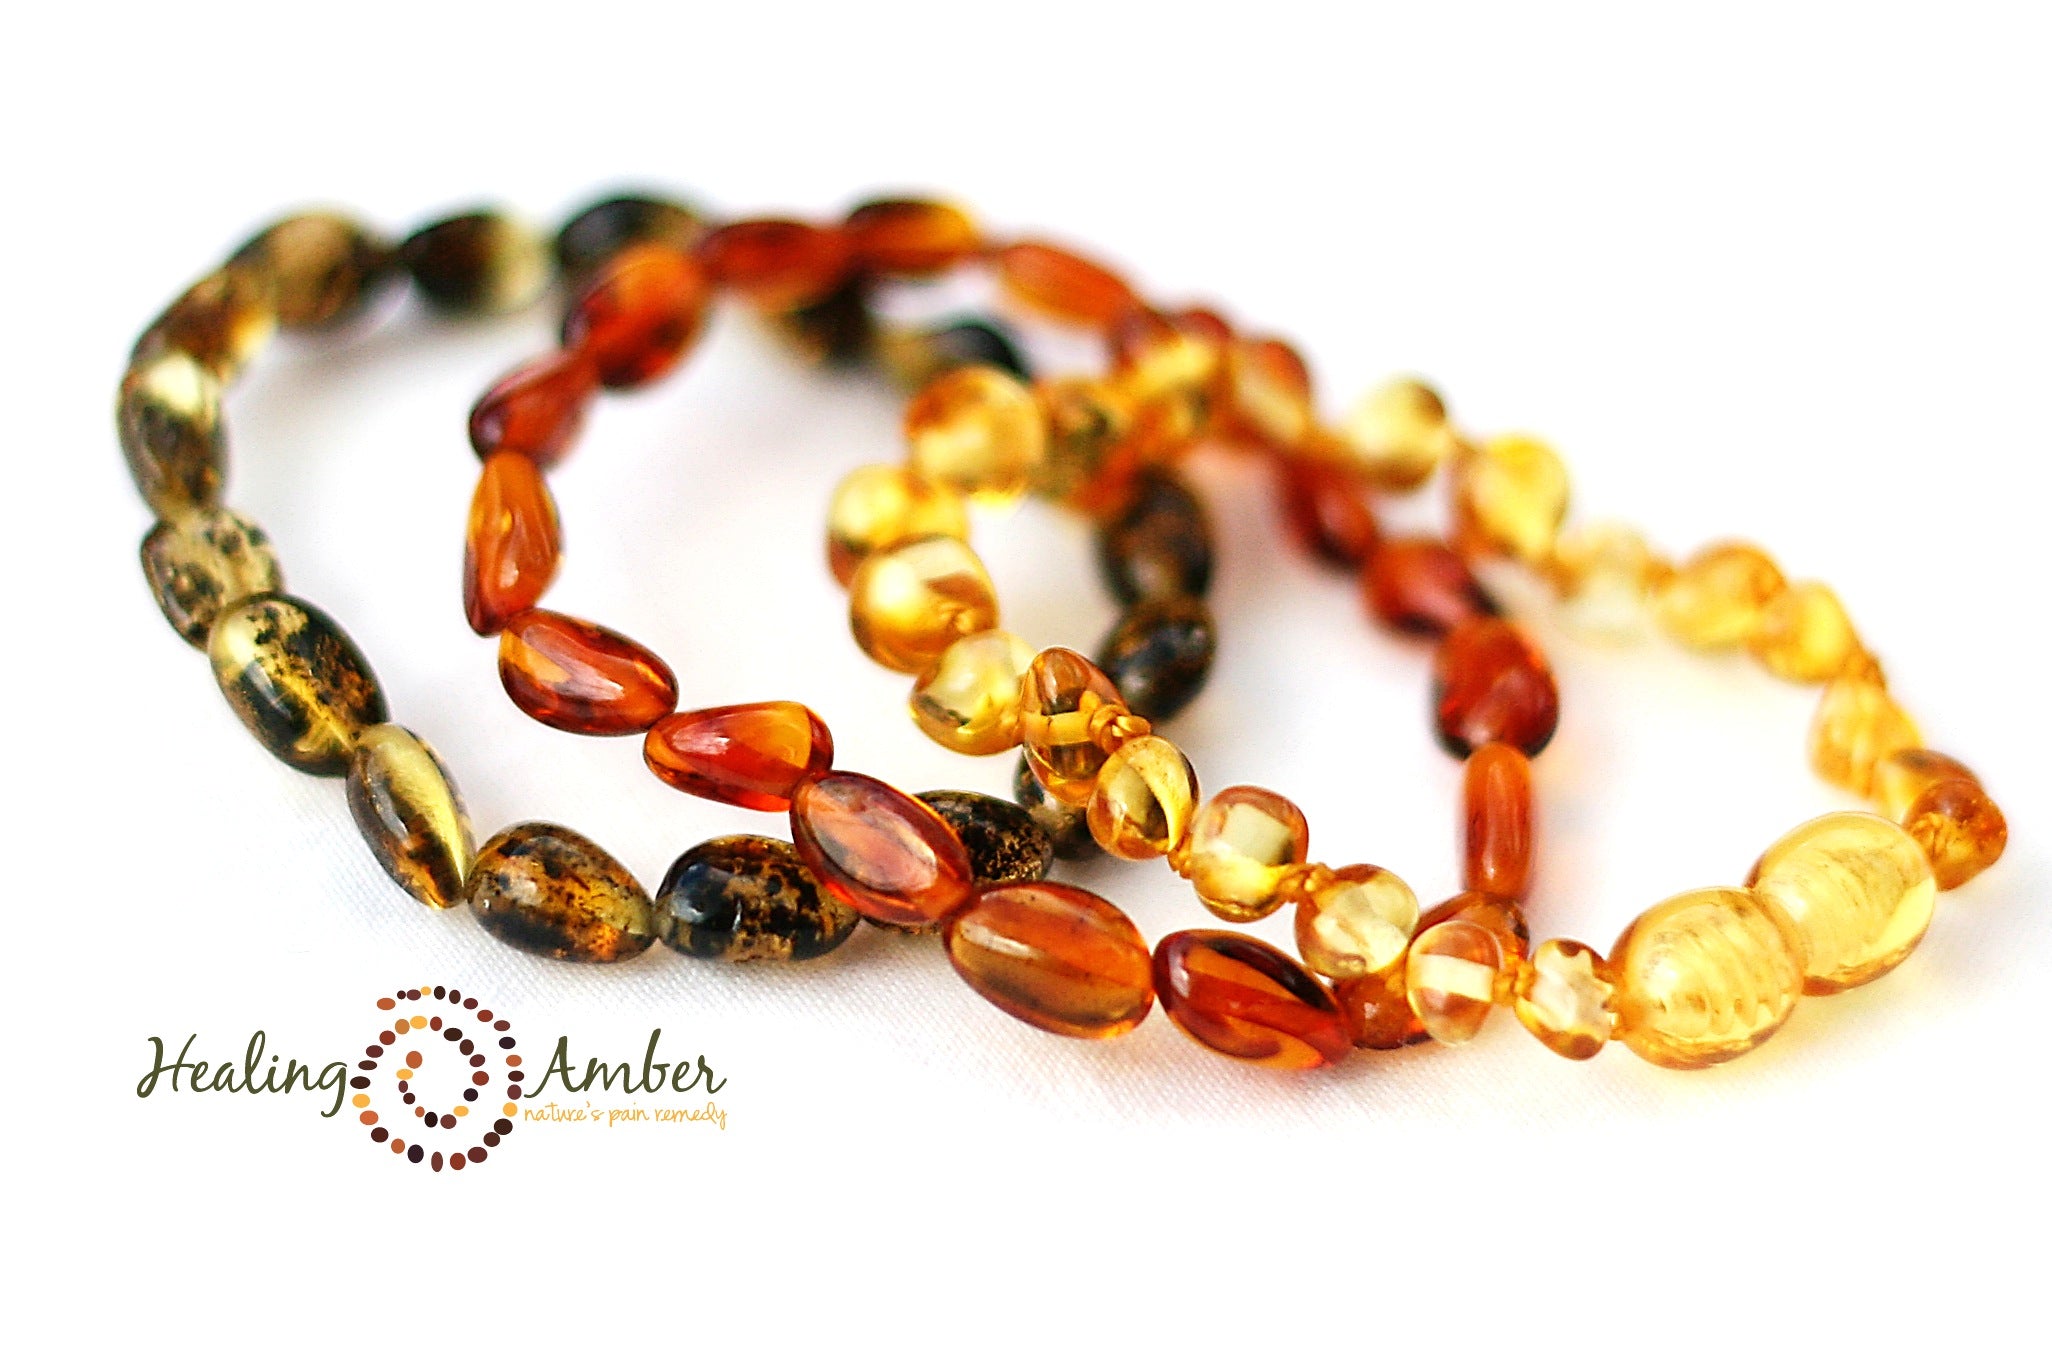 Raw Amber Healing Bracelet Made of Multicolor Baltic Amber.